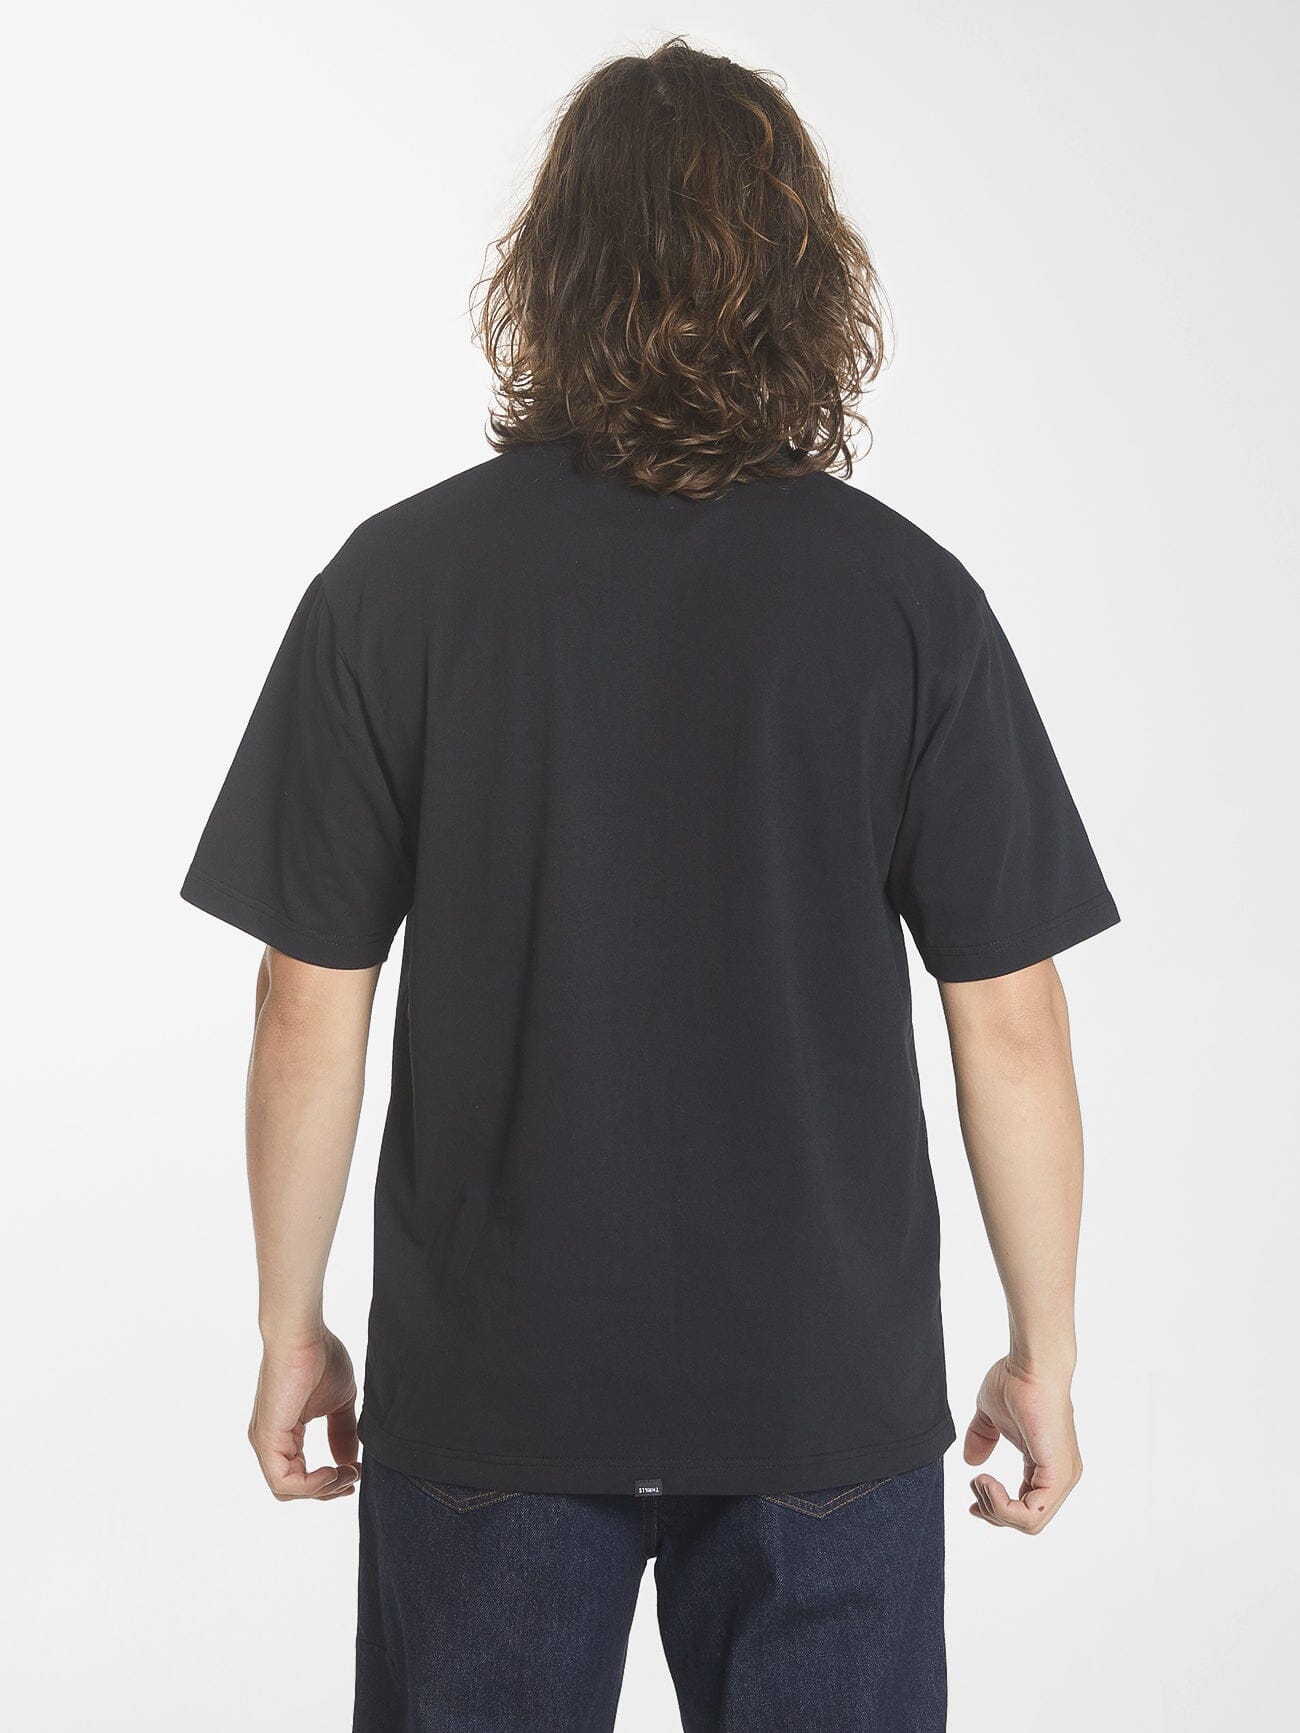 Arch Oversize Fit Tee - Black XS